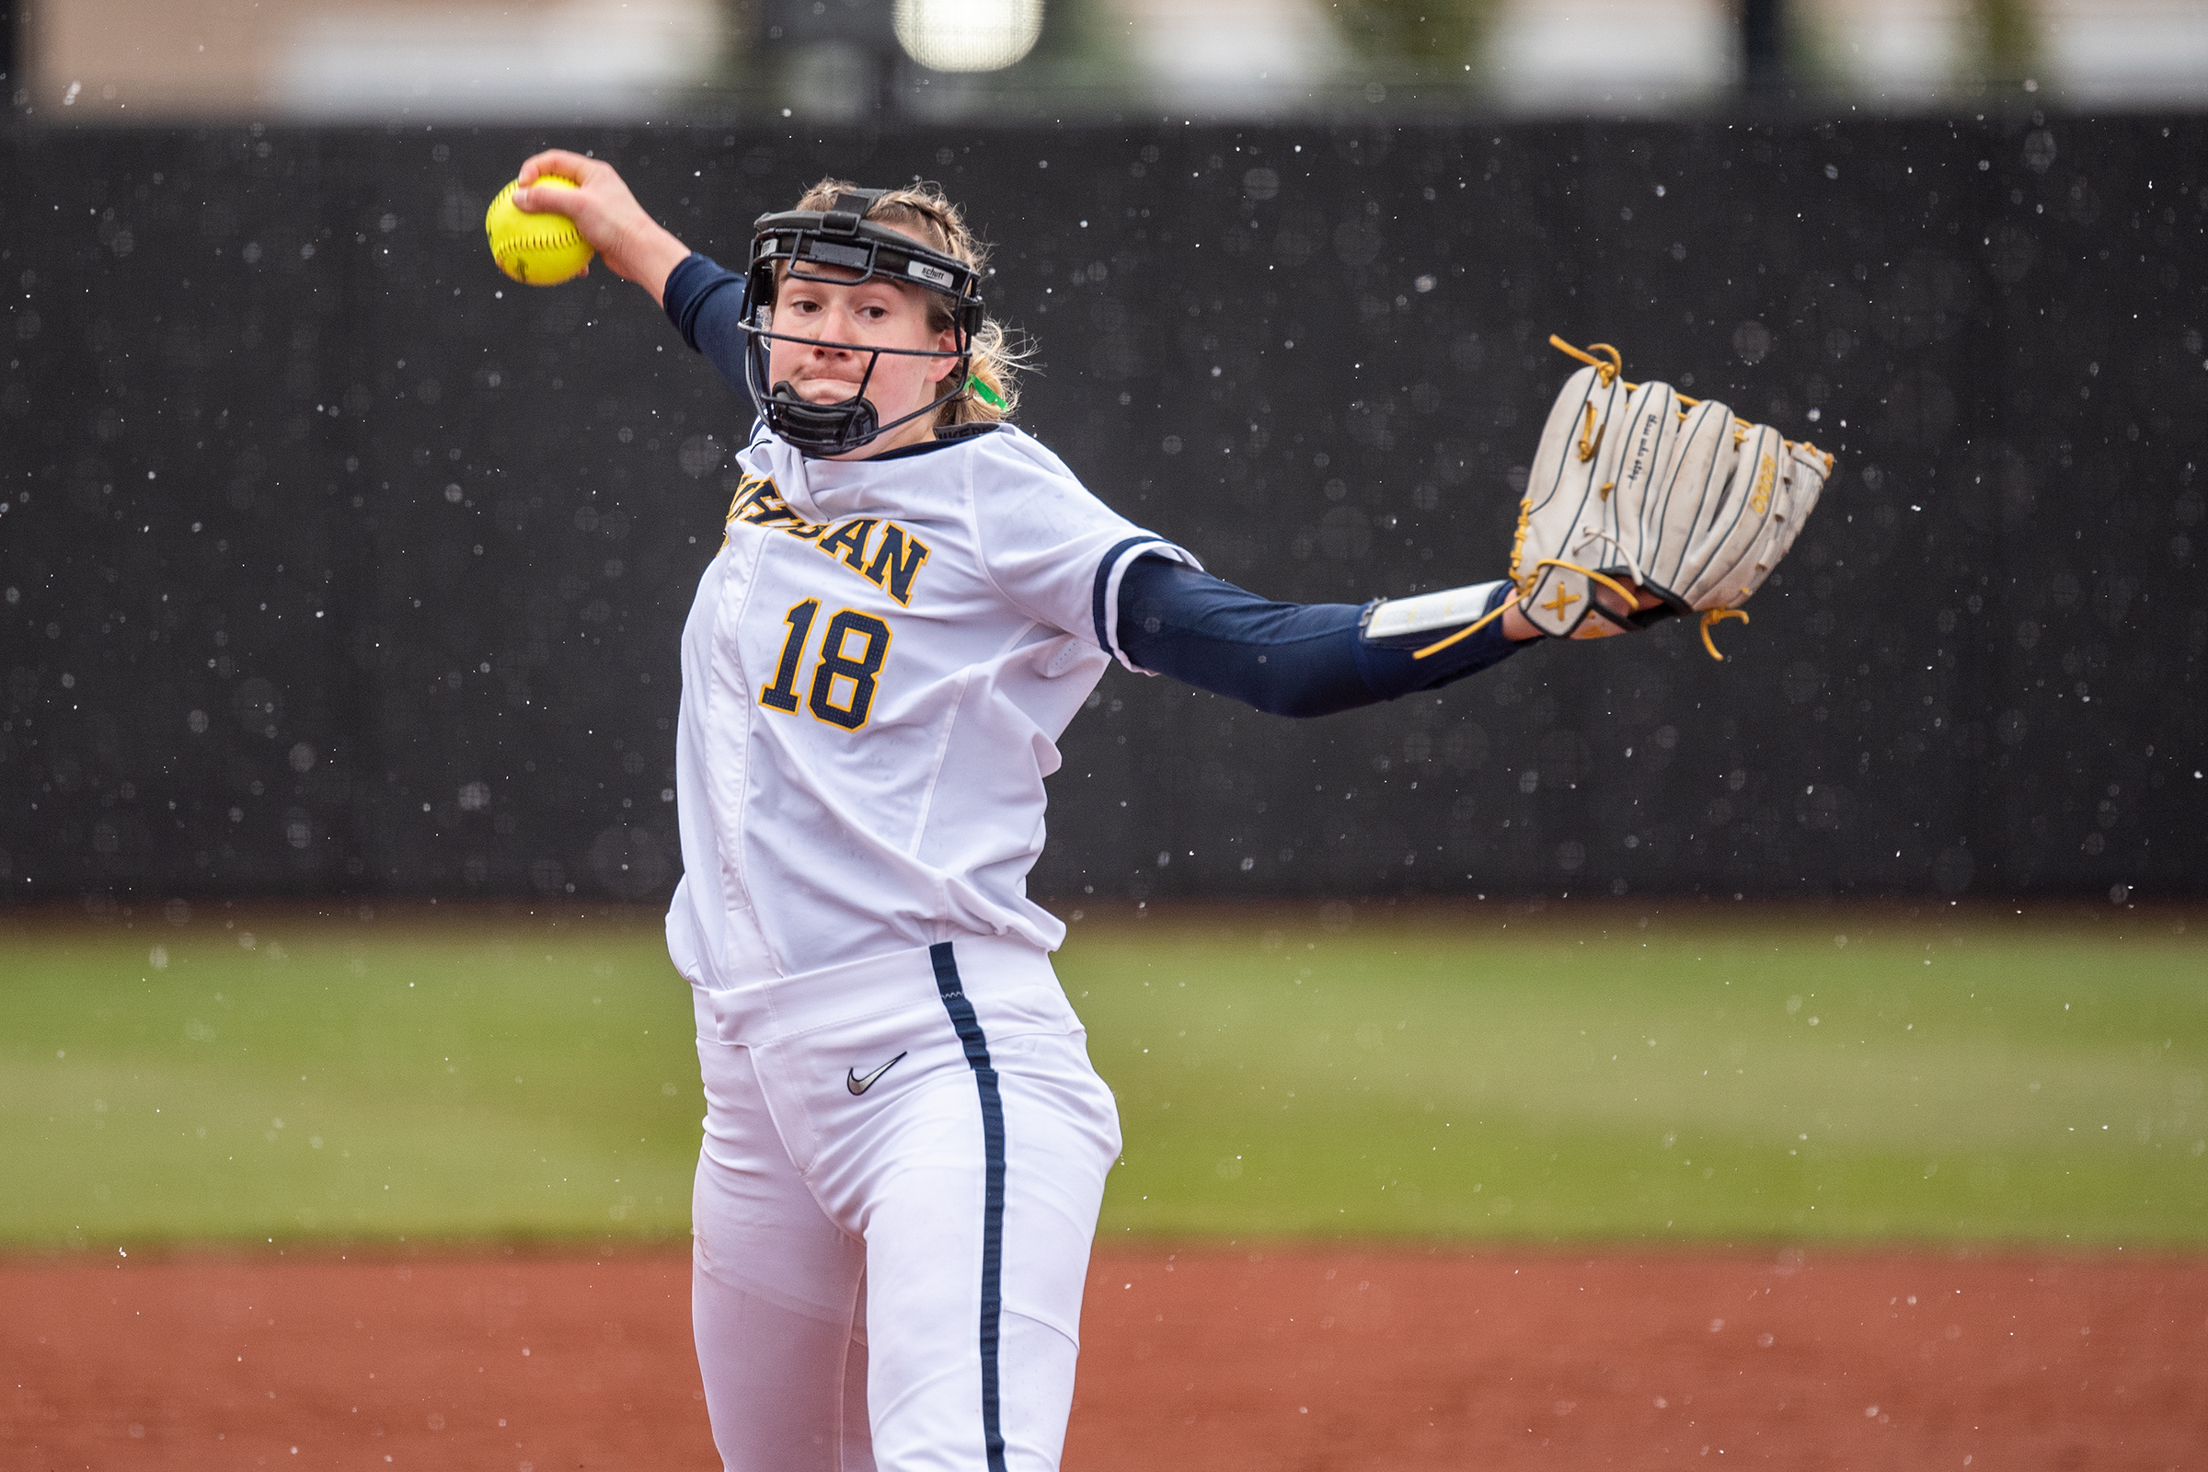 Lauren Derkowski is wearing a white uniform and is mid pitch. Her hand with the mit is stretched out to the side while her other hand grips the ball as her arm swings. Behind her, snow is falling.